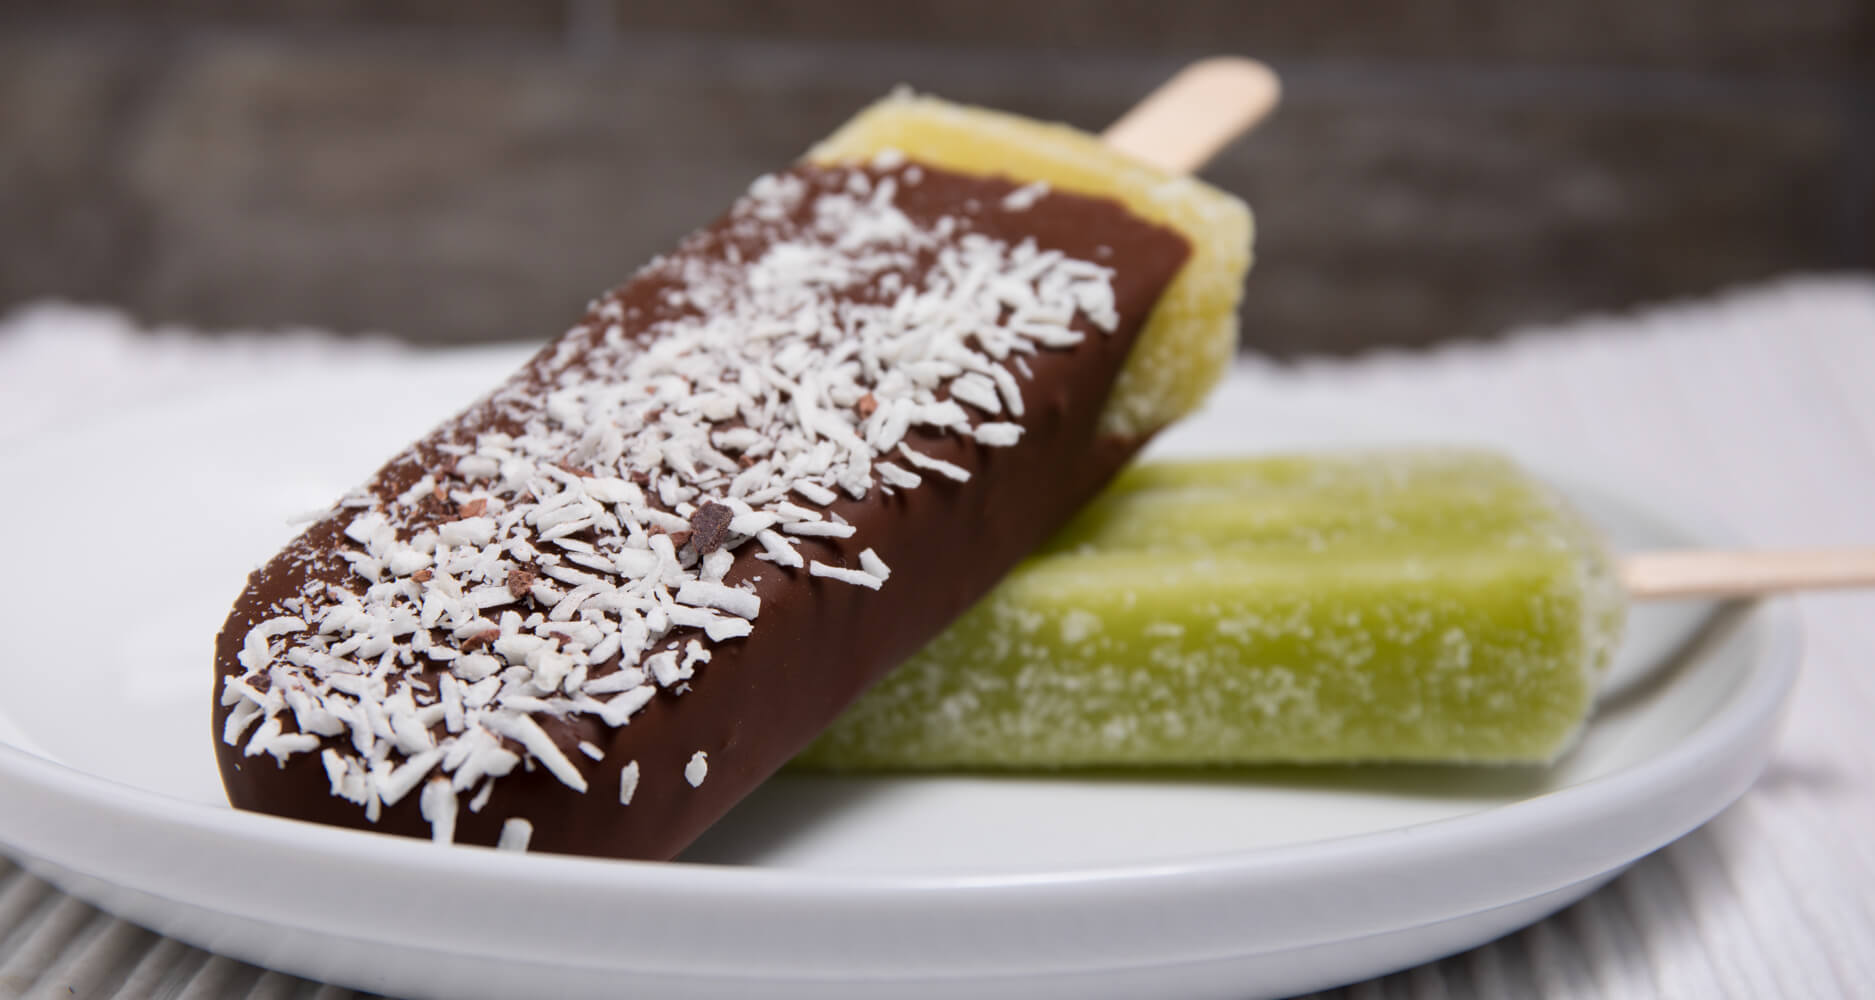 Press Brothers Juicery-Chocolate dipped Pop and Liquid Gold Pop 18